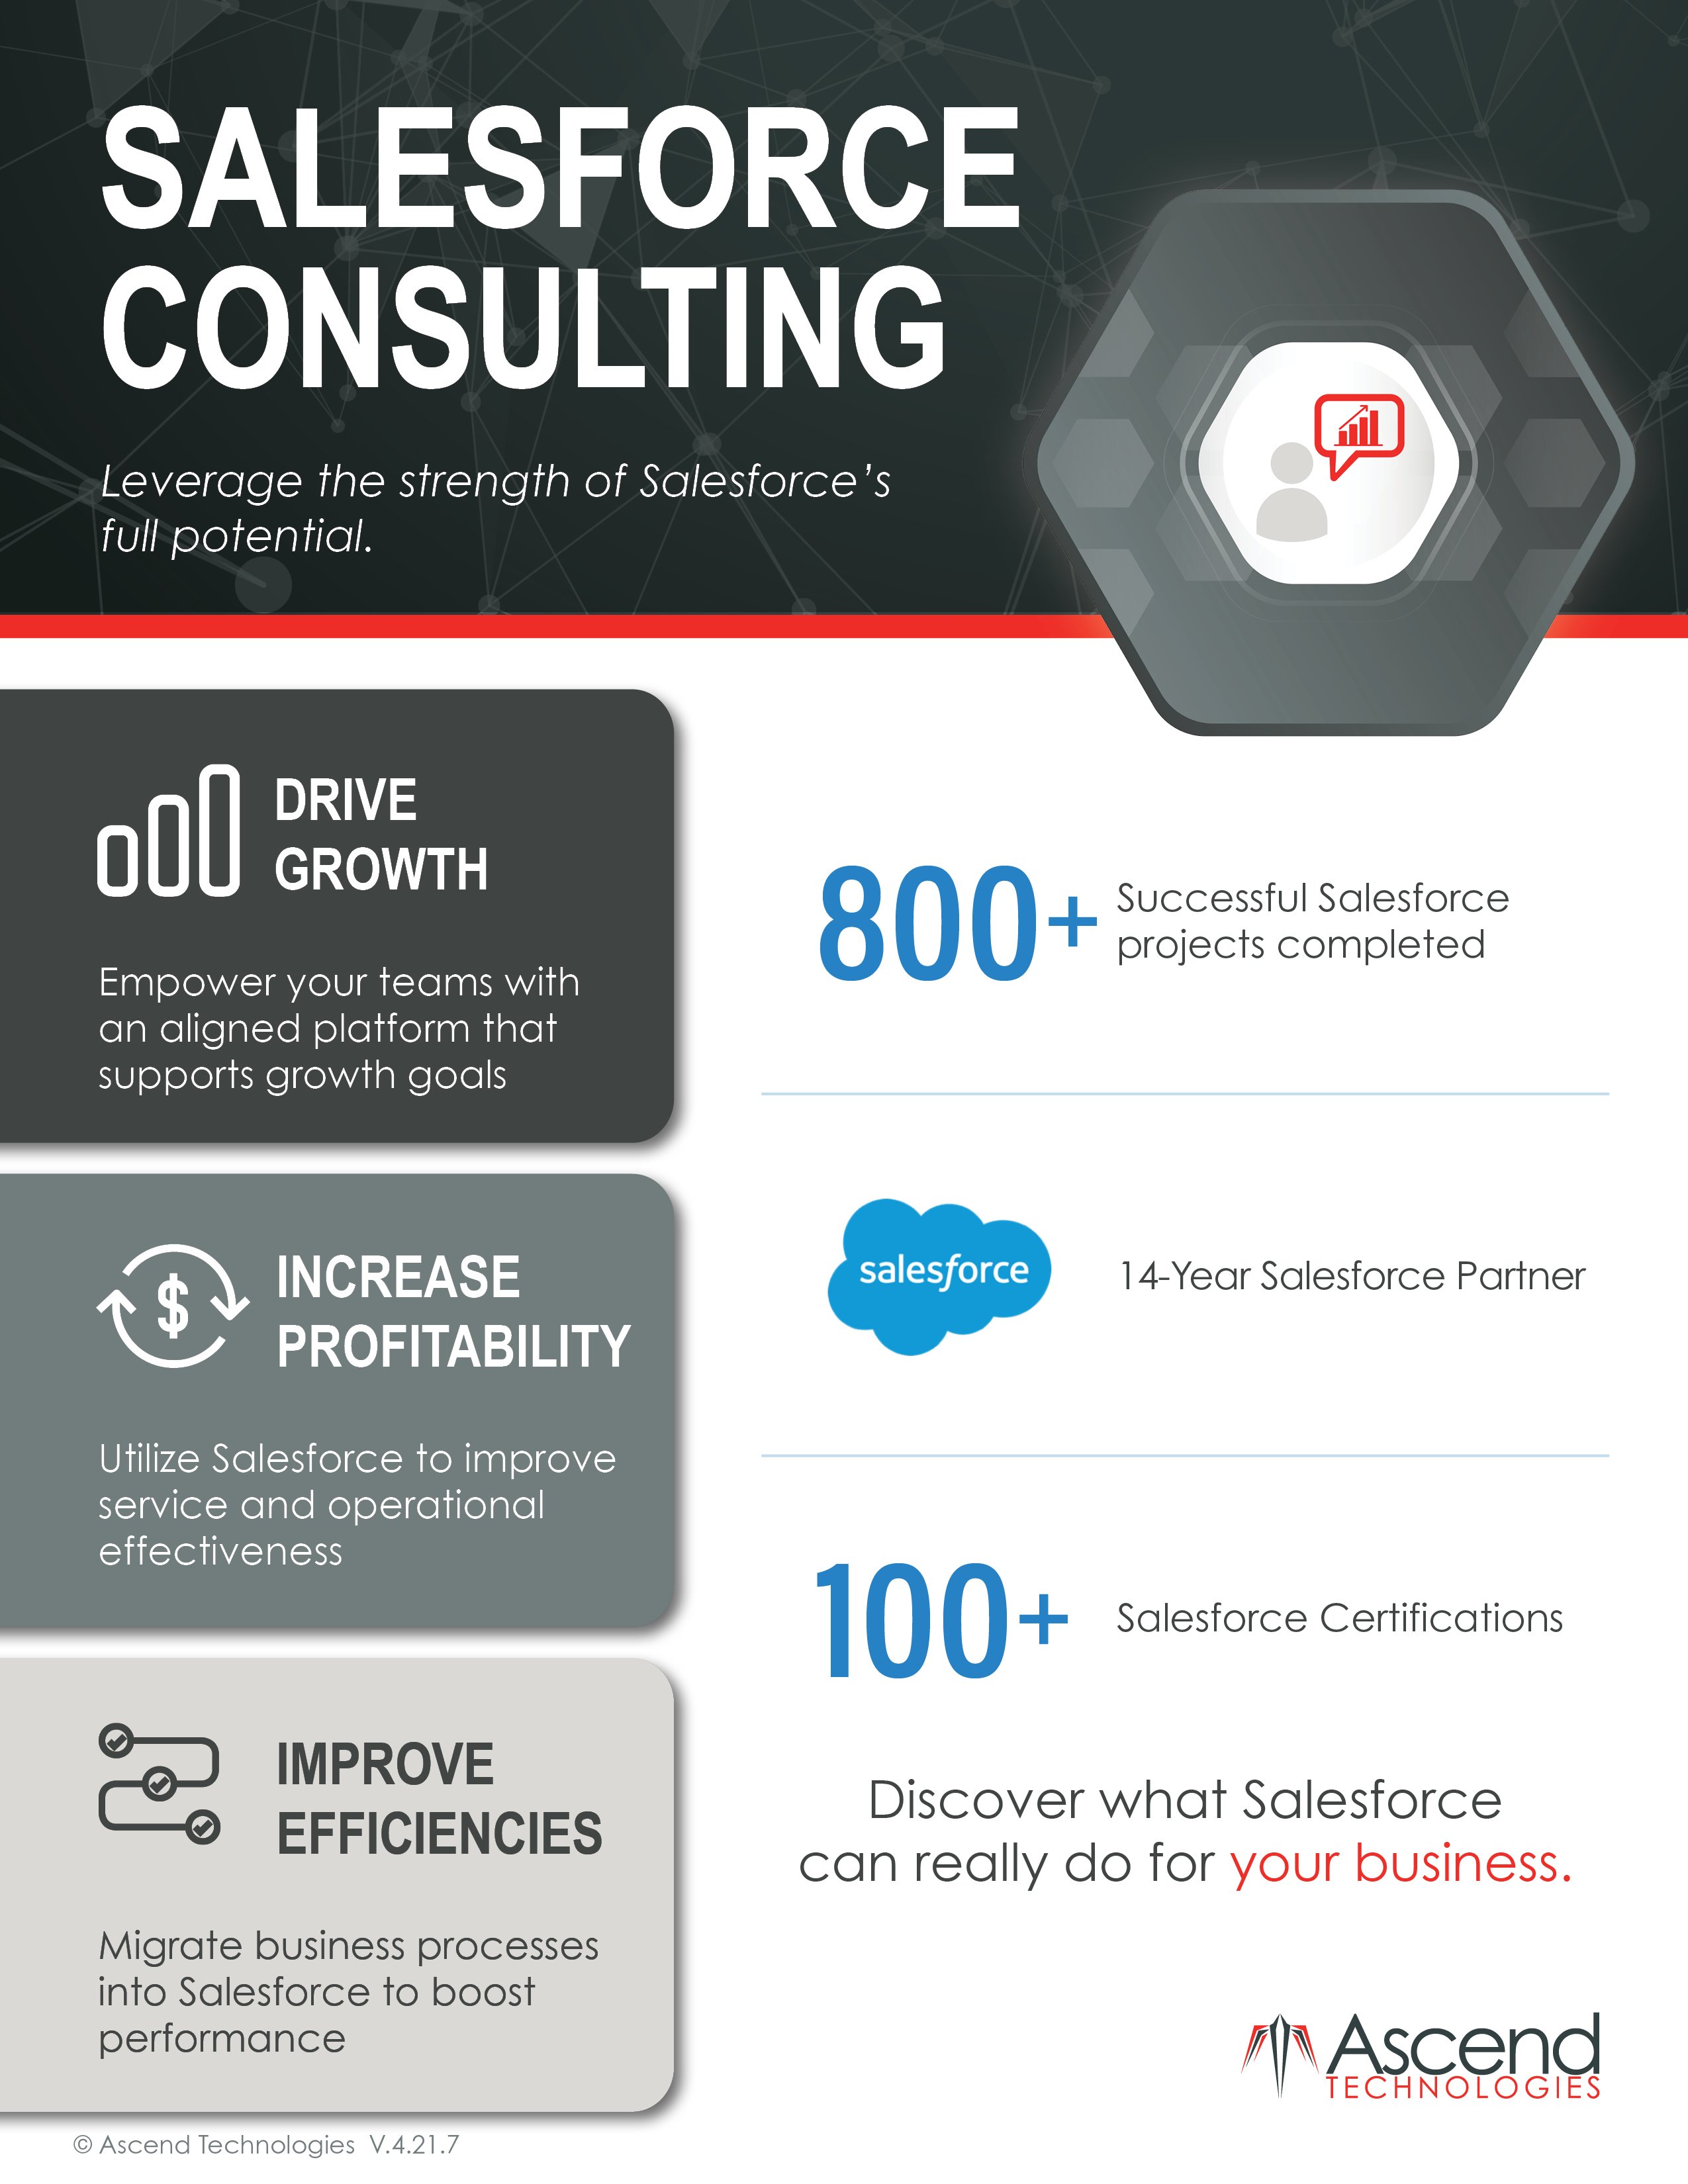 Salesforce-Consulting